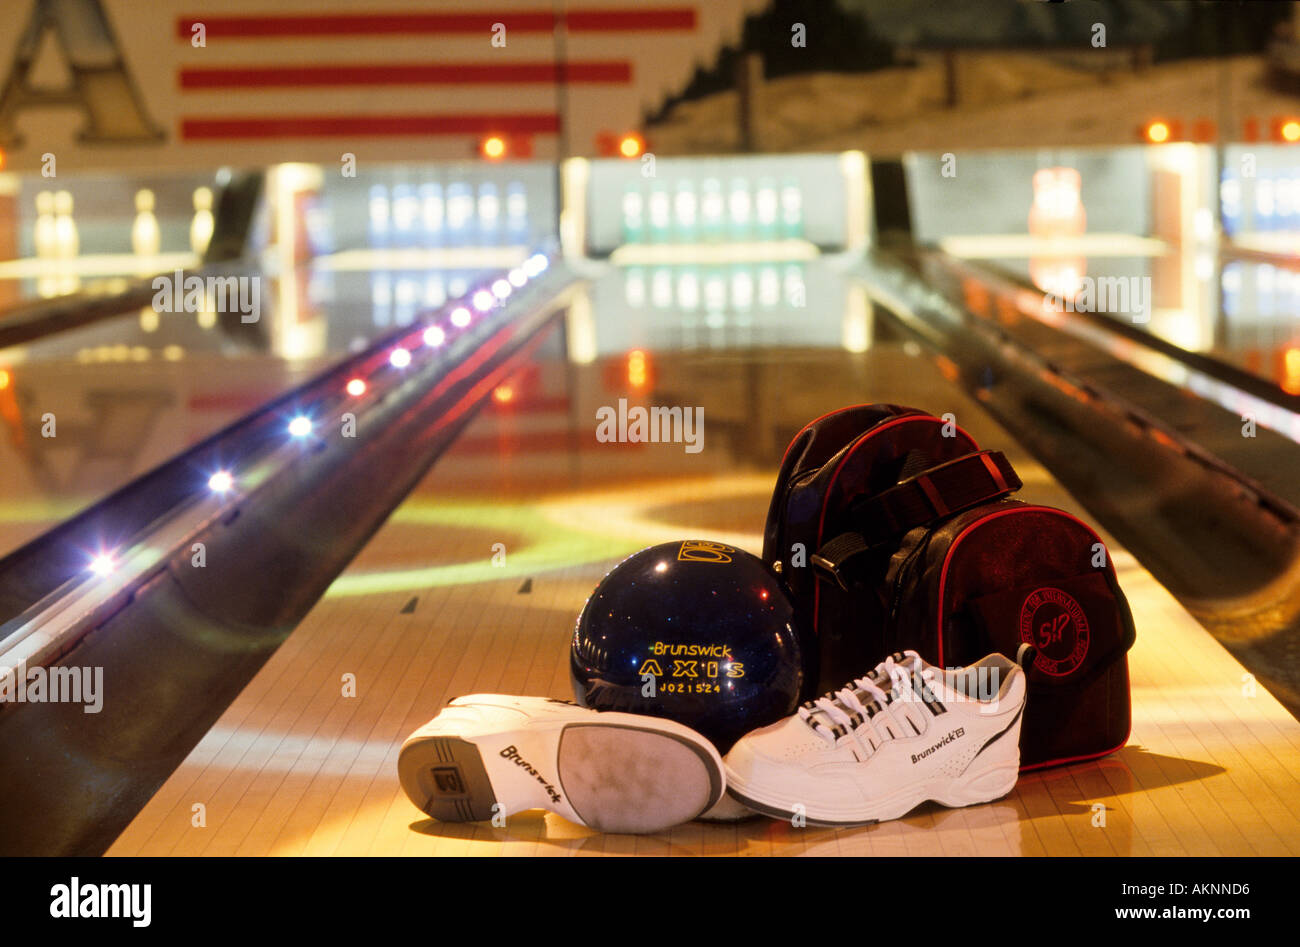 Germany Free time At a bowling alley shoes ball and rucksack  Stock Photo